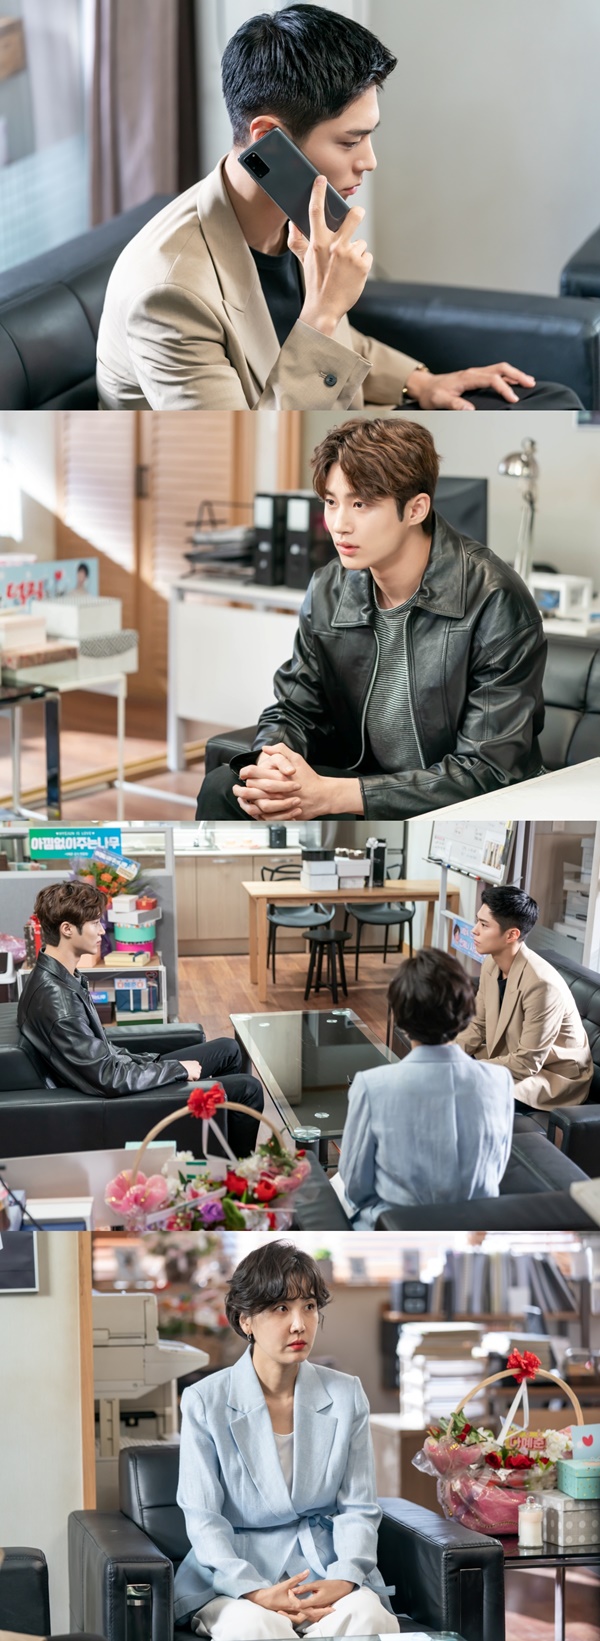 Aid appears in front of Park Bo-gum, where the Record of Youth ordeal comes.TVNs monthly drama Record of Youth (playplayed by Ha Myung-hee and director Ahn Gil-ho) released the images of Sangers Sa Hye-joon (Park Bo-gum) and Won Hae-hyo (Byeon Woo-seok) on the 12th.The day I have never seen before, I am curious about the nerves.In the last broadcast, Sa Hye-joon won the best performance award by succeeding in the drama Return of the King.Sa Hye-joons unstoppable Shus move, which has achieved Actors dream over the cold reality, has given a thrilling Qatarsis, but unexpected trials have come.The news of Charlie Chung (Lee Seung-jun)s death, which was taken by Sa Hye-joon at the moment of enjoying happiness, amplified his curiosity about future development.In the meantime, the tension of Champon Entertainment is caught, further heightening the sense of Danger.The hard face of Sa Hye-joon, who is talking to someone, makes him guess the unusual incident that came to him.With the silence flowing, Sa Hye-joon and Won Hae-hyos day-long eye contact tighten the tension. Manager Lee Min-jae (Shin Dong-mi) is also confused.Sa Hye-joon and Won Hae-hyo, who supported each other more than anyone else while growing the same dream, are drawing attention to what changes will come to the two youths who face the crossroads of different Choices.On this day, in the 11th episode, the overcoming of Sa Hye-joon, who faced an unexpected trials, is drawn.Charlie Justice Aid will appear unwelcome to Sa Hye-joon, who is suffering from uncontrollable rumors due to death.Record of Youth production team said, Please pay attention to whether you can protect your dreams, love and friendship in your own Danger.Choices of Sa Hye-joon, who does not lose his conviction, will have another impression and Qatarsis. The 11th episode of Record of Youth airs at 9 p.m. on the night.